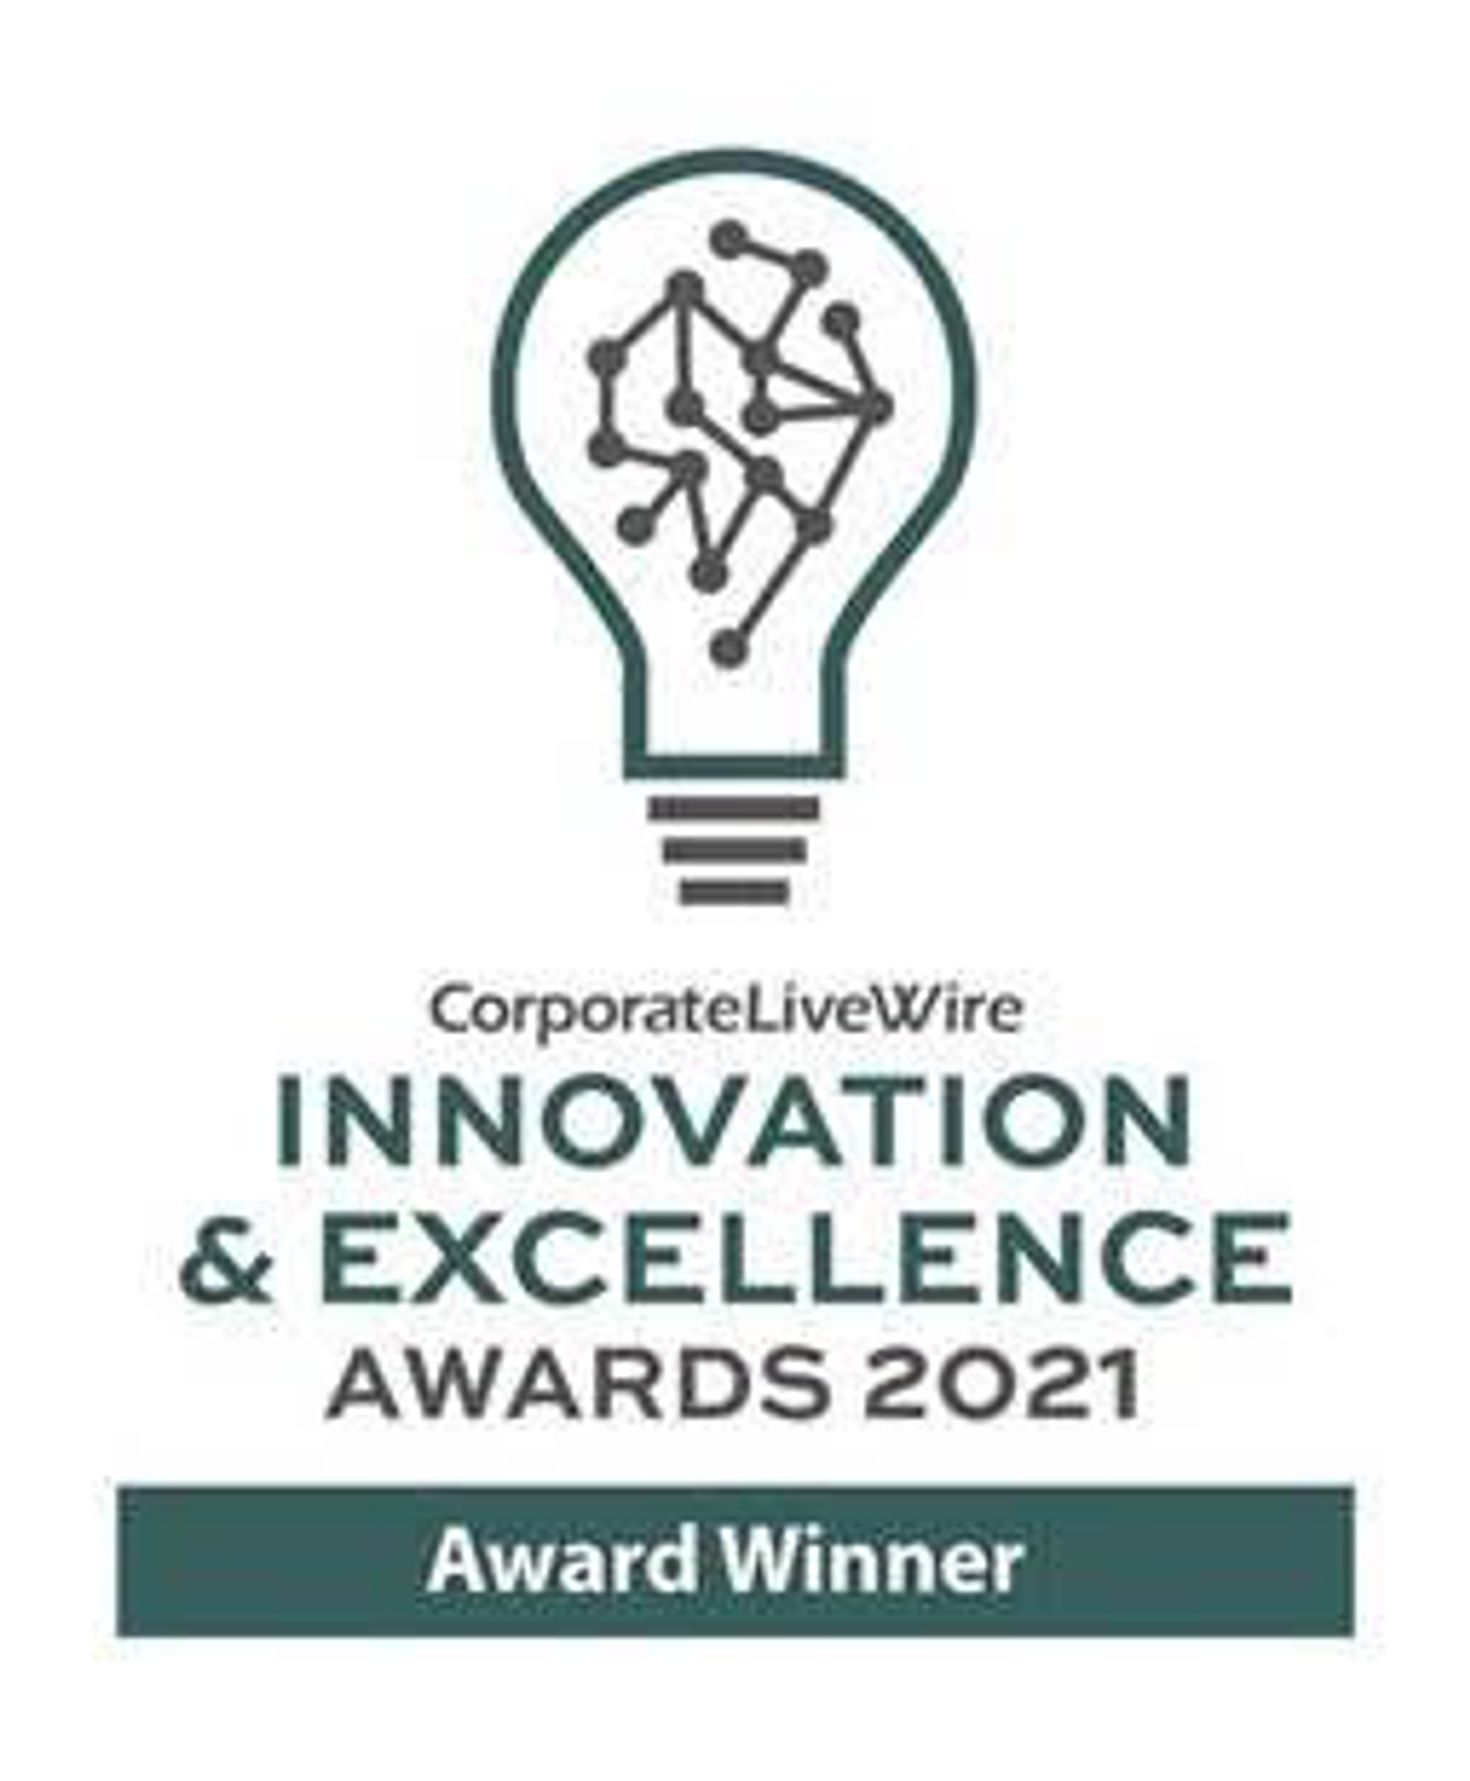 Software Development Consultancy of the Year